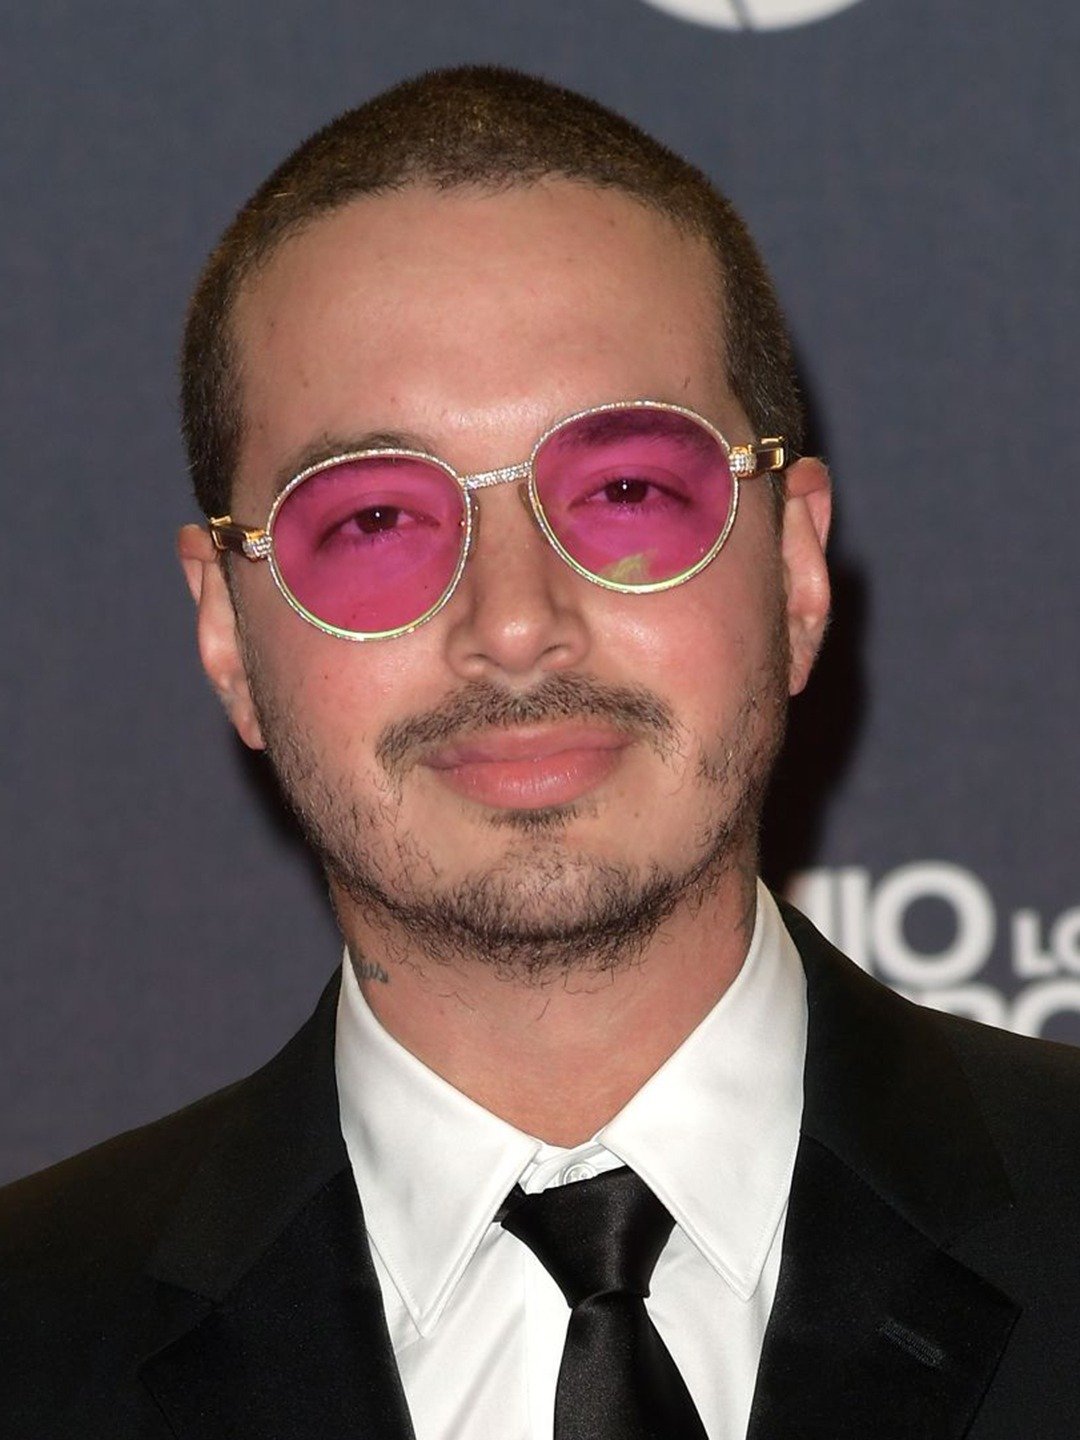 How tall is J Balvin?